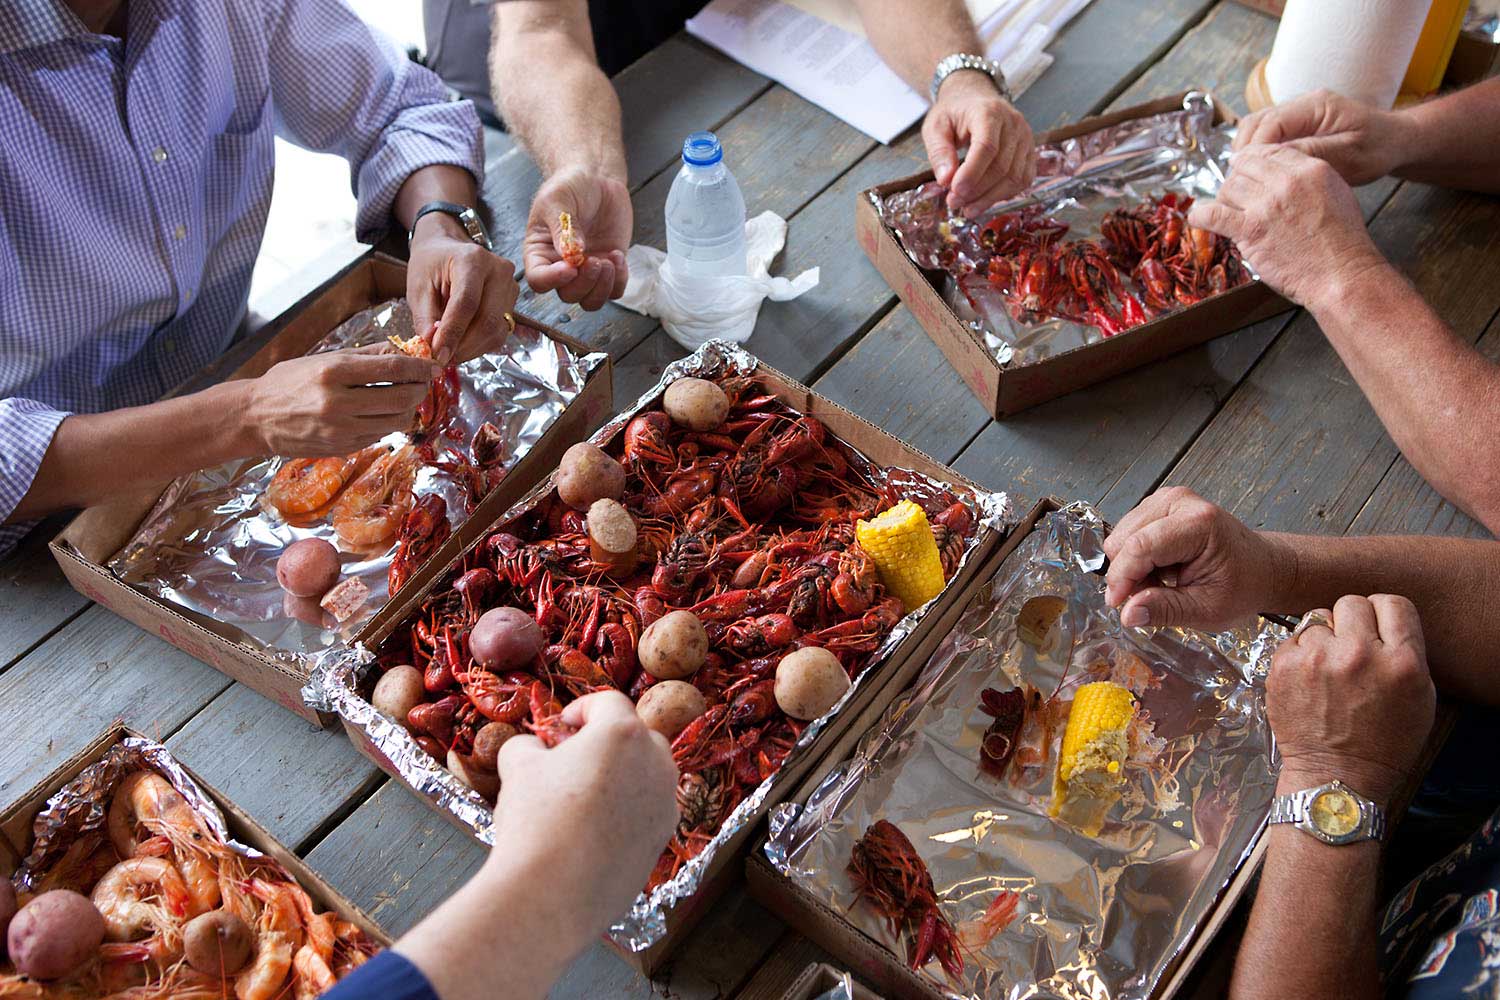 "To call attention to the safety of the seafood in the Gulf Coast after the BP oil spill, the President ate some shrimp and crawfish with locals in Grand Isle, La., June 4, 2010. I noticed all the hands digging into the food and thought it made an interesting angle."